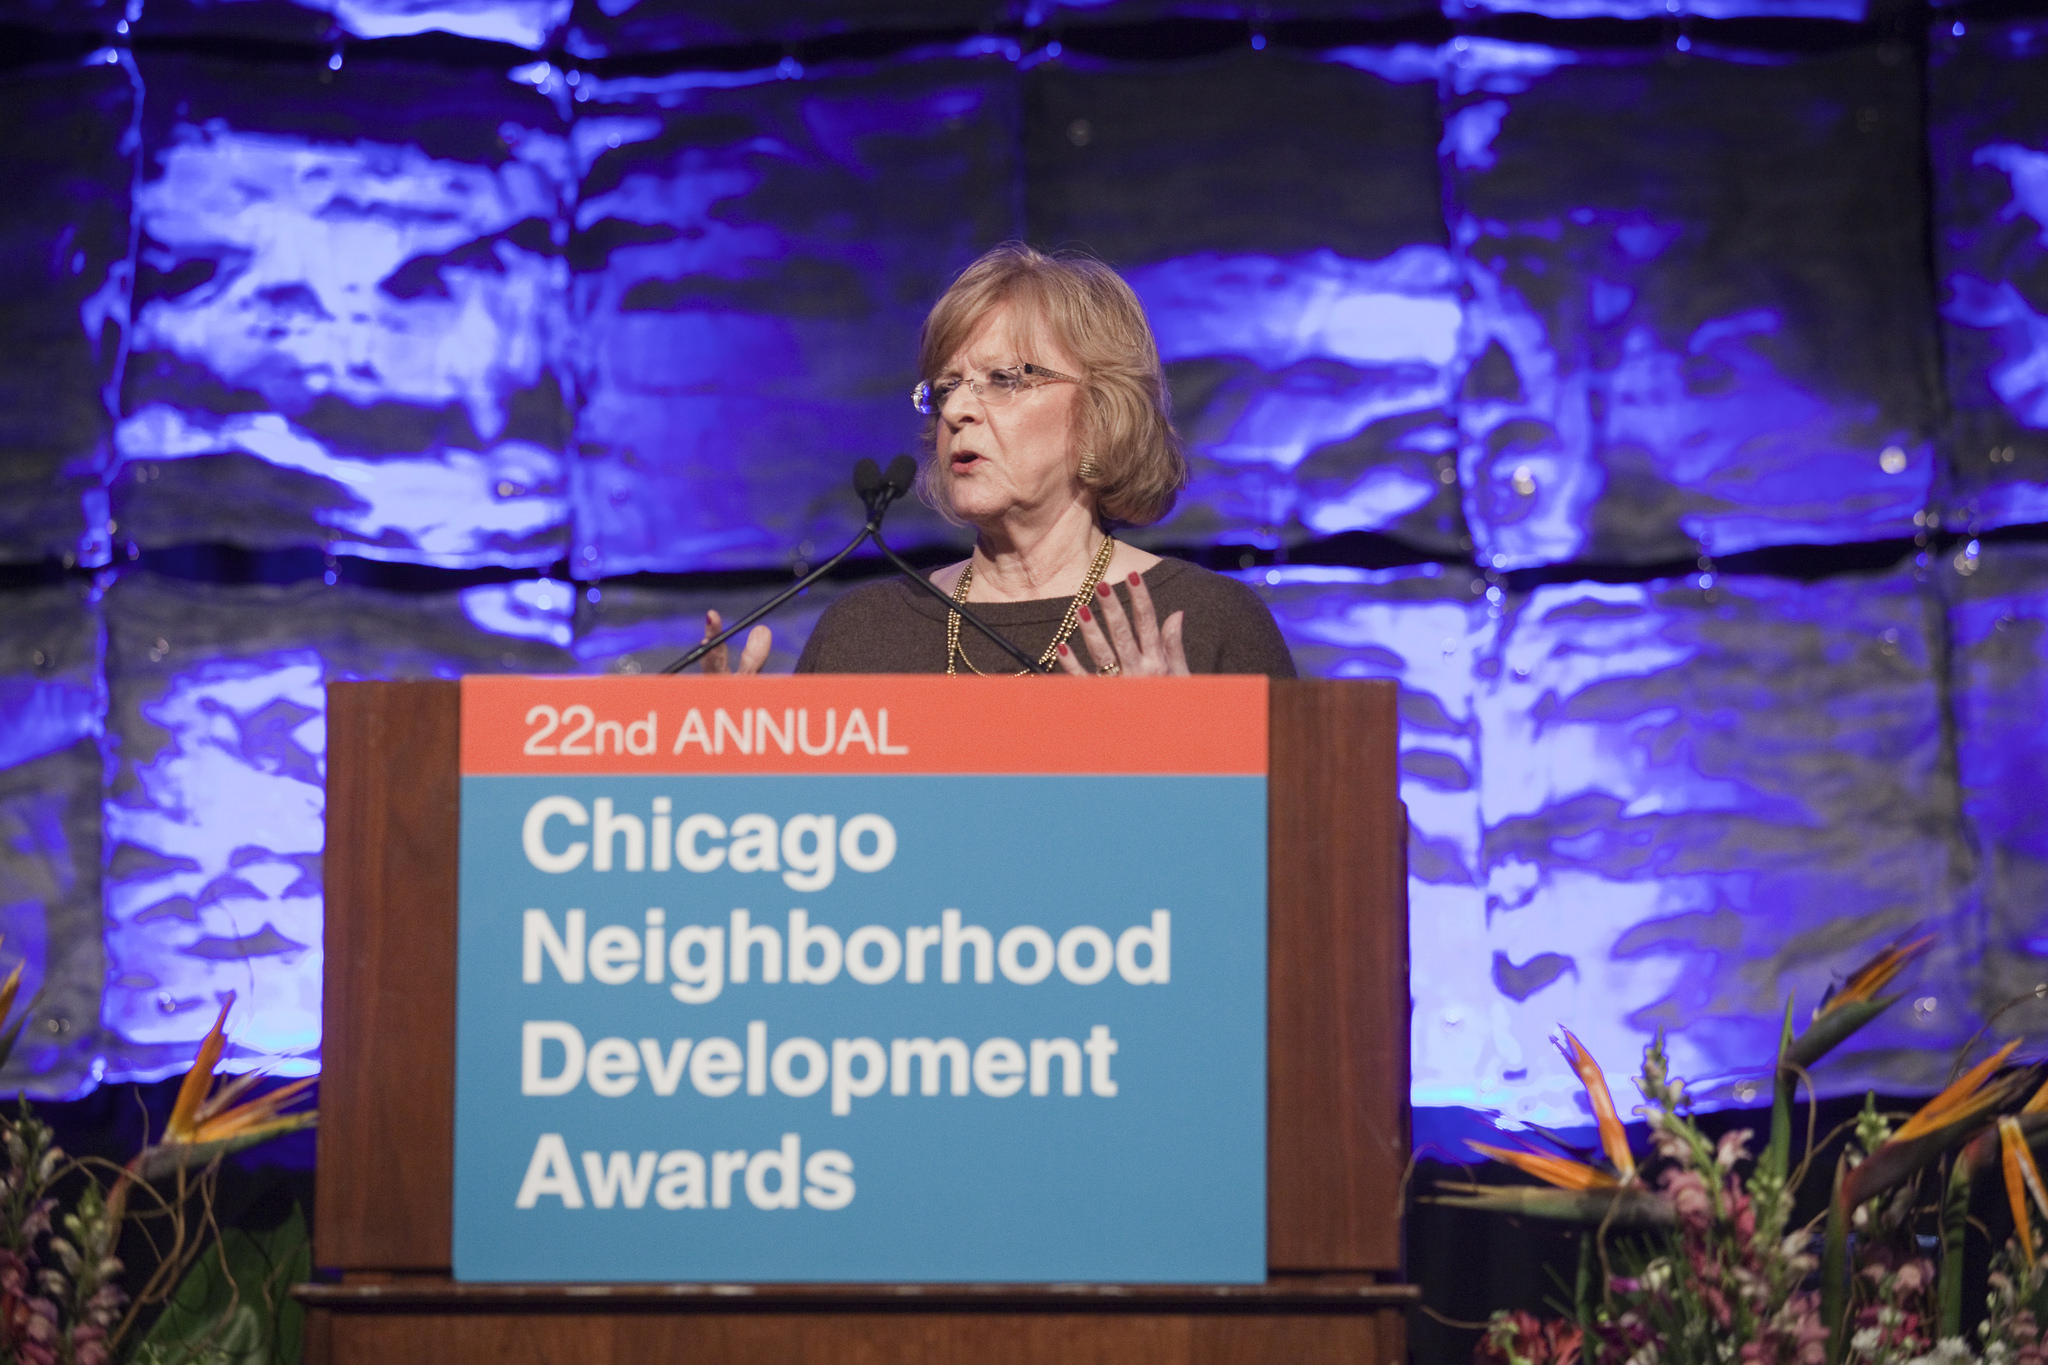 Julia-Stasch-President-of-The-John-D.-and-Catherine-T.-MacArthur-Foundation-and-provided-Keynote-for-CNDA22.jpg